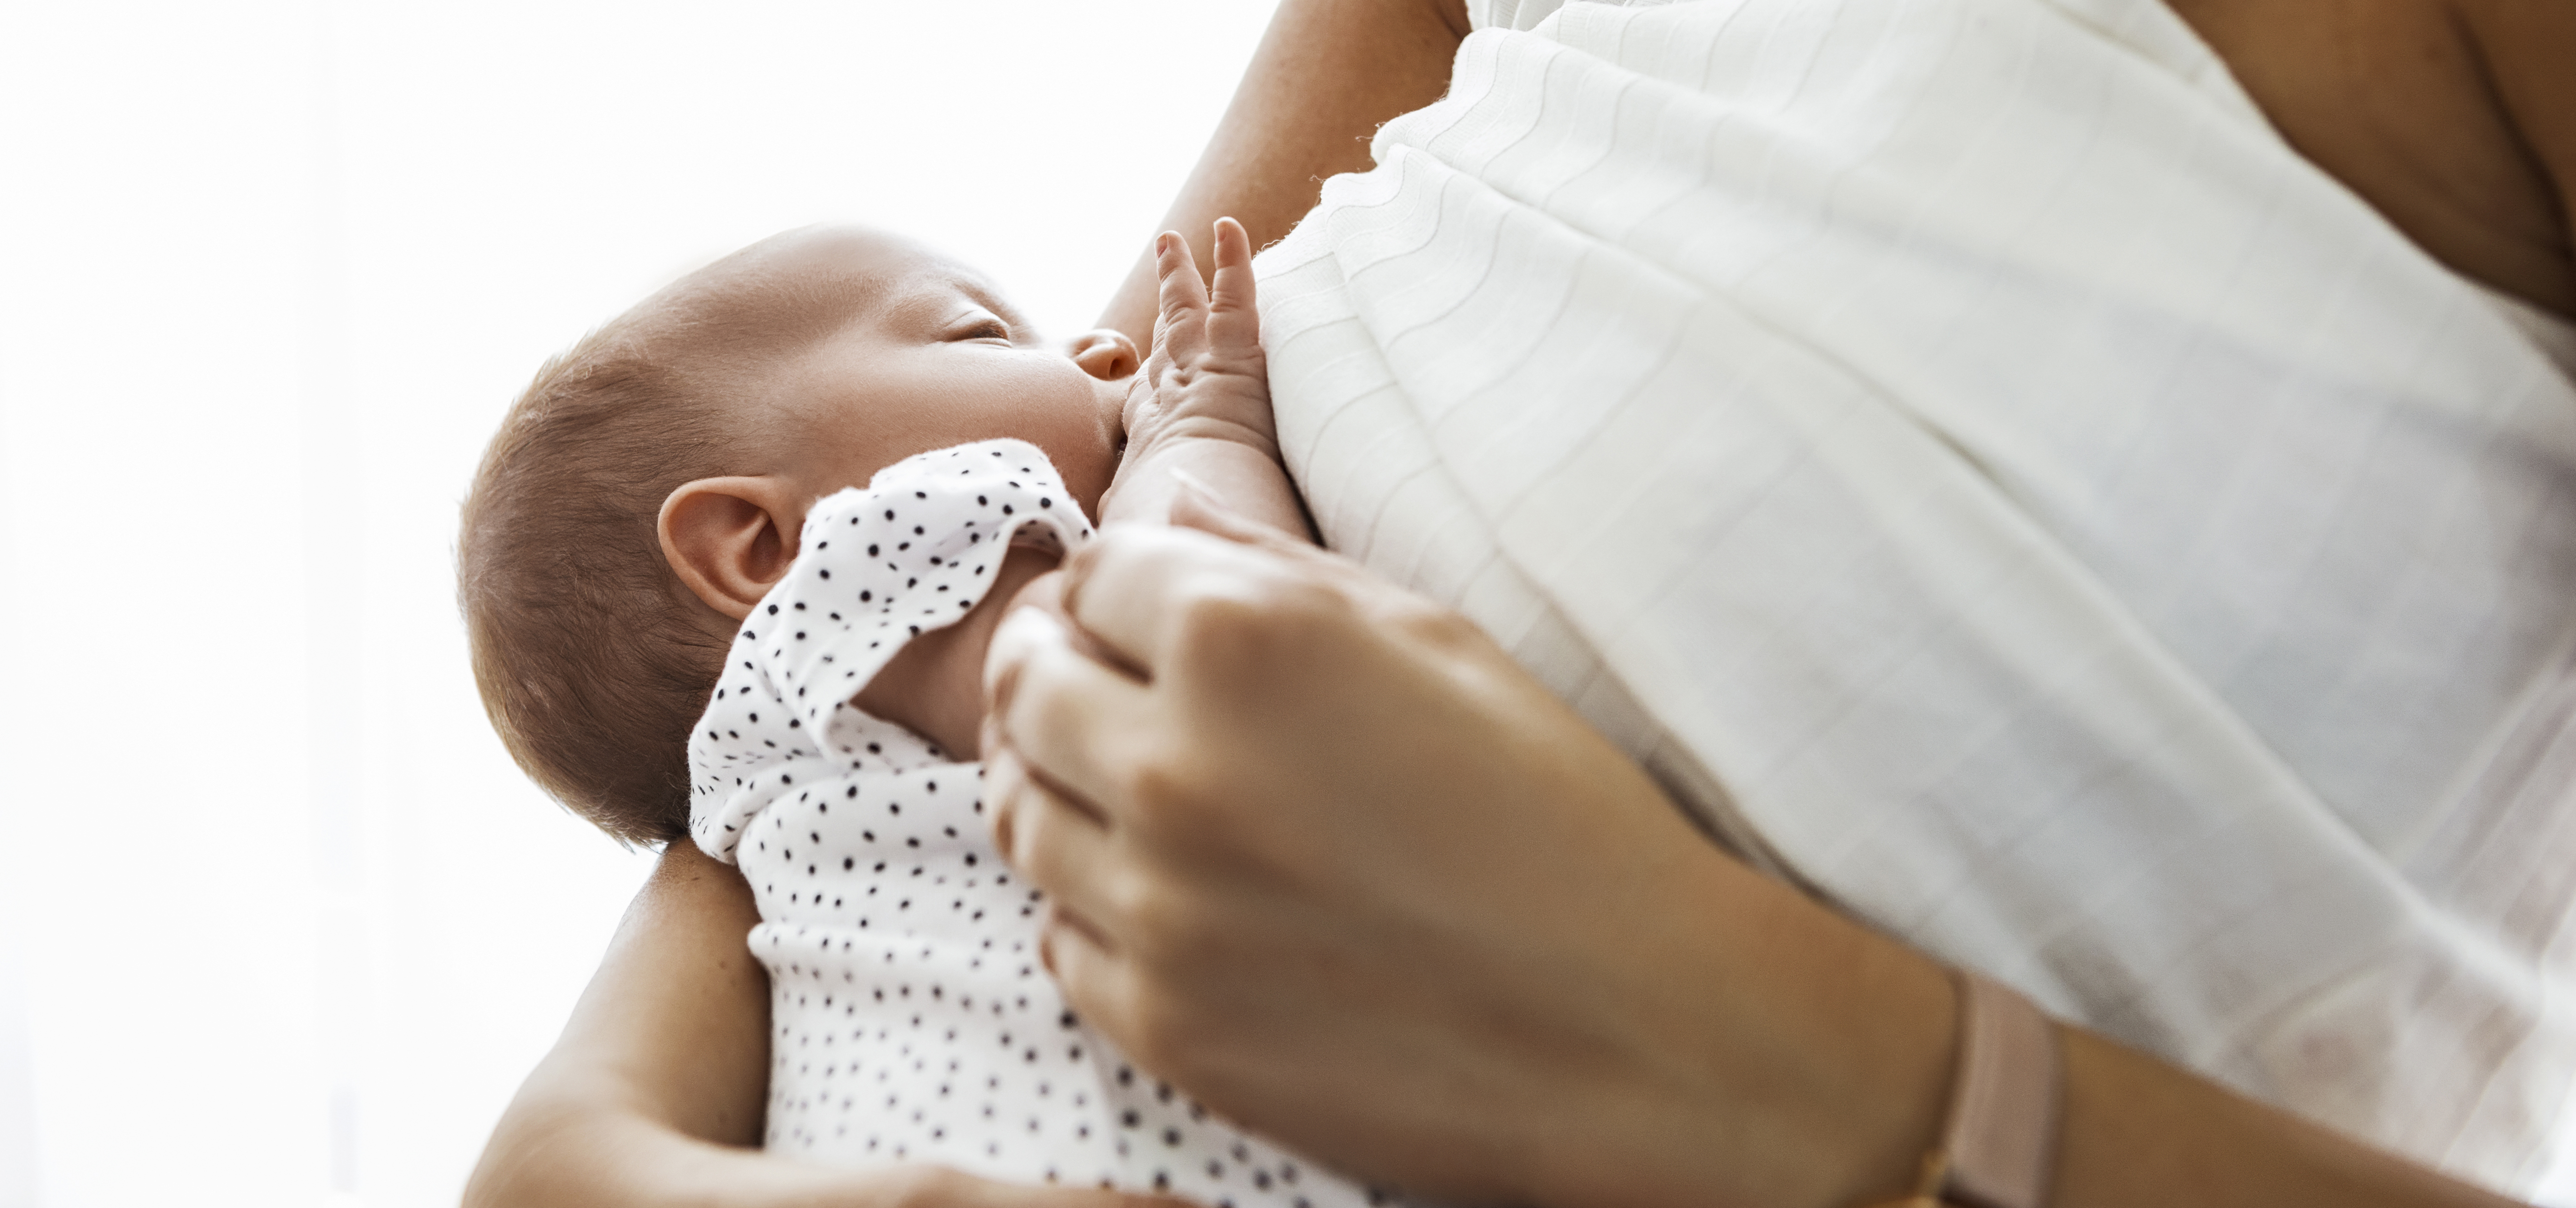 Staying up-to-date – COVID-19 vaccines and breastfeeding